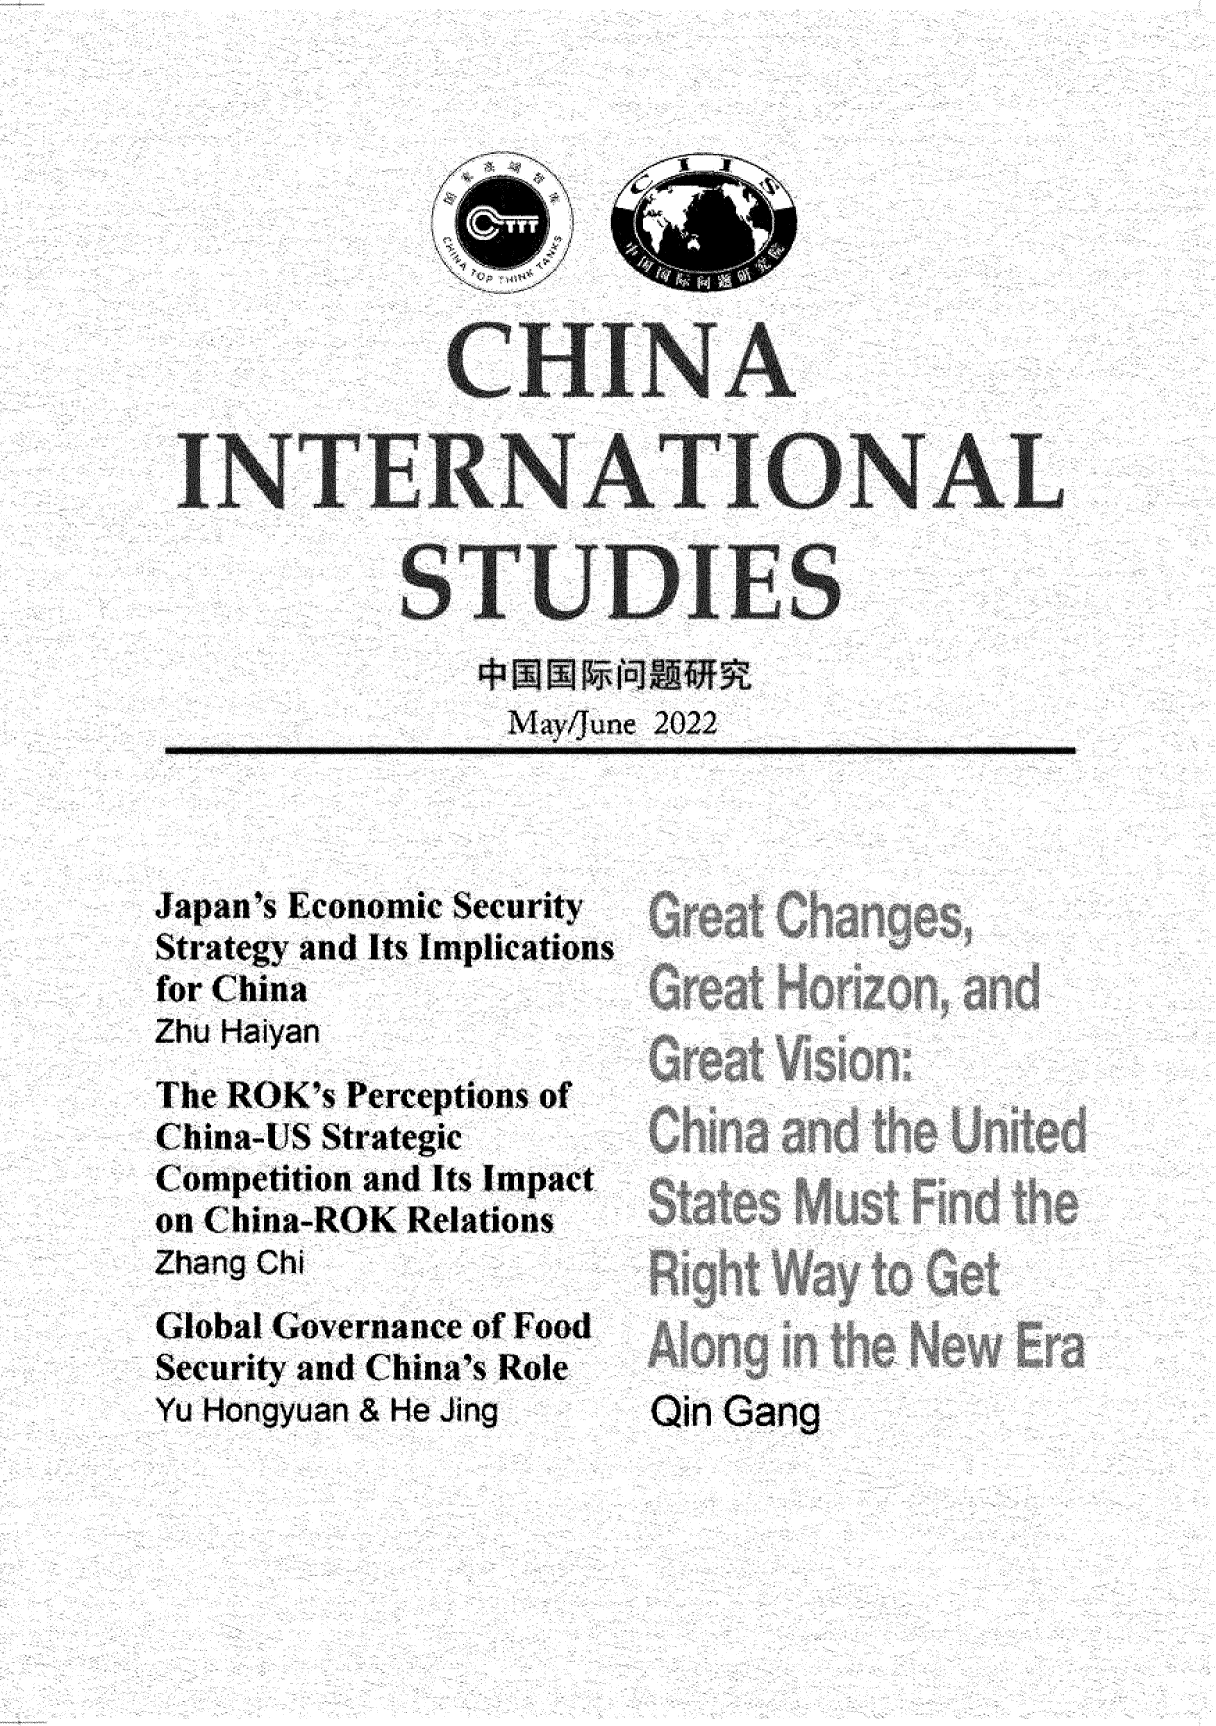 handle is hein.journals/chintersd94 and id is 1 raw text is: INTERN             TO         A
o  z `'S T UD   I ES:n^  1'A  r~w }   ' F4.:   ;.  ..r

May/June 2022

Japan's Economic Security
Strategy and Its Implications
for China
Zhu Haiyan
The ROK's Perceptions of
China-US Strategic
Competition and Its Impact
on China-ROK Relations
Zhang Chi
Global Governance of Food
Security and China's Role
Yu Hongyuan & He Jing

Qin Gang

i              r
}

.. _J -_


